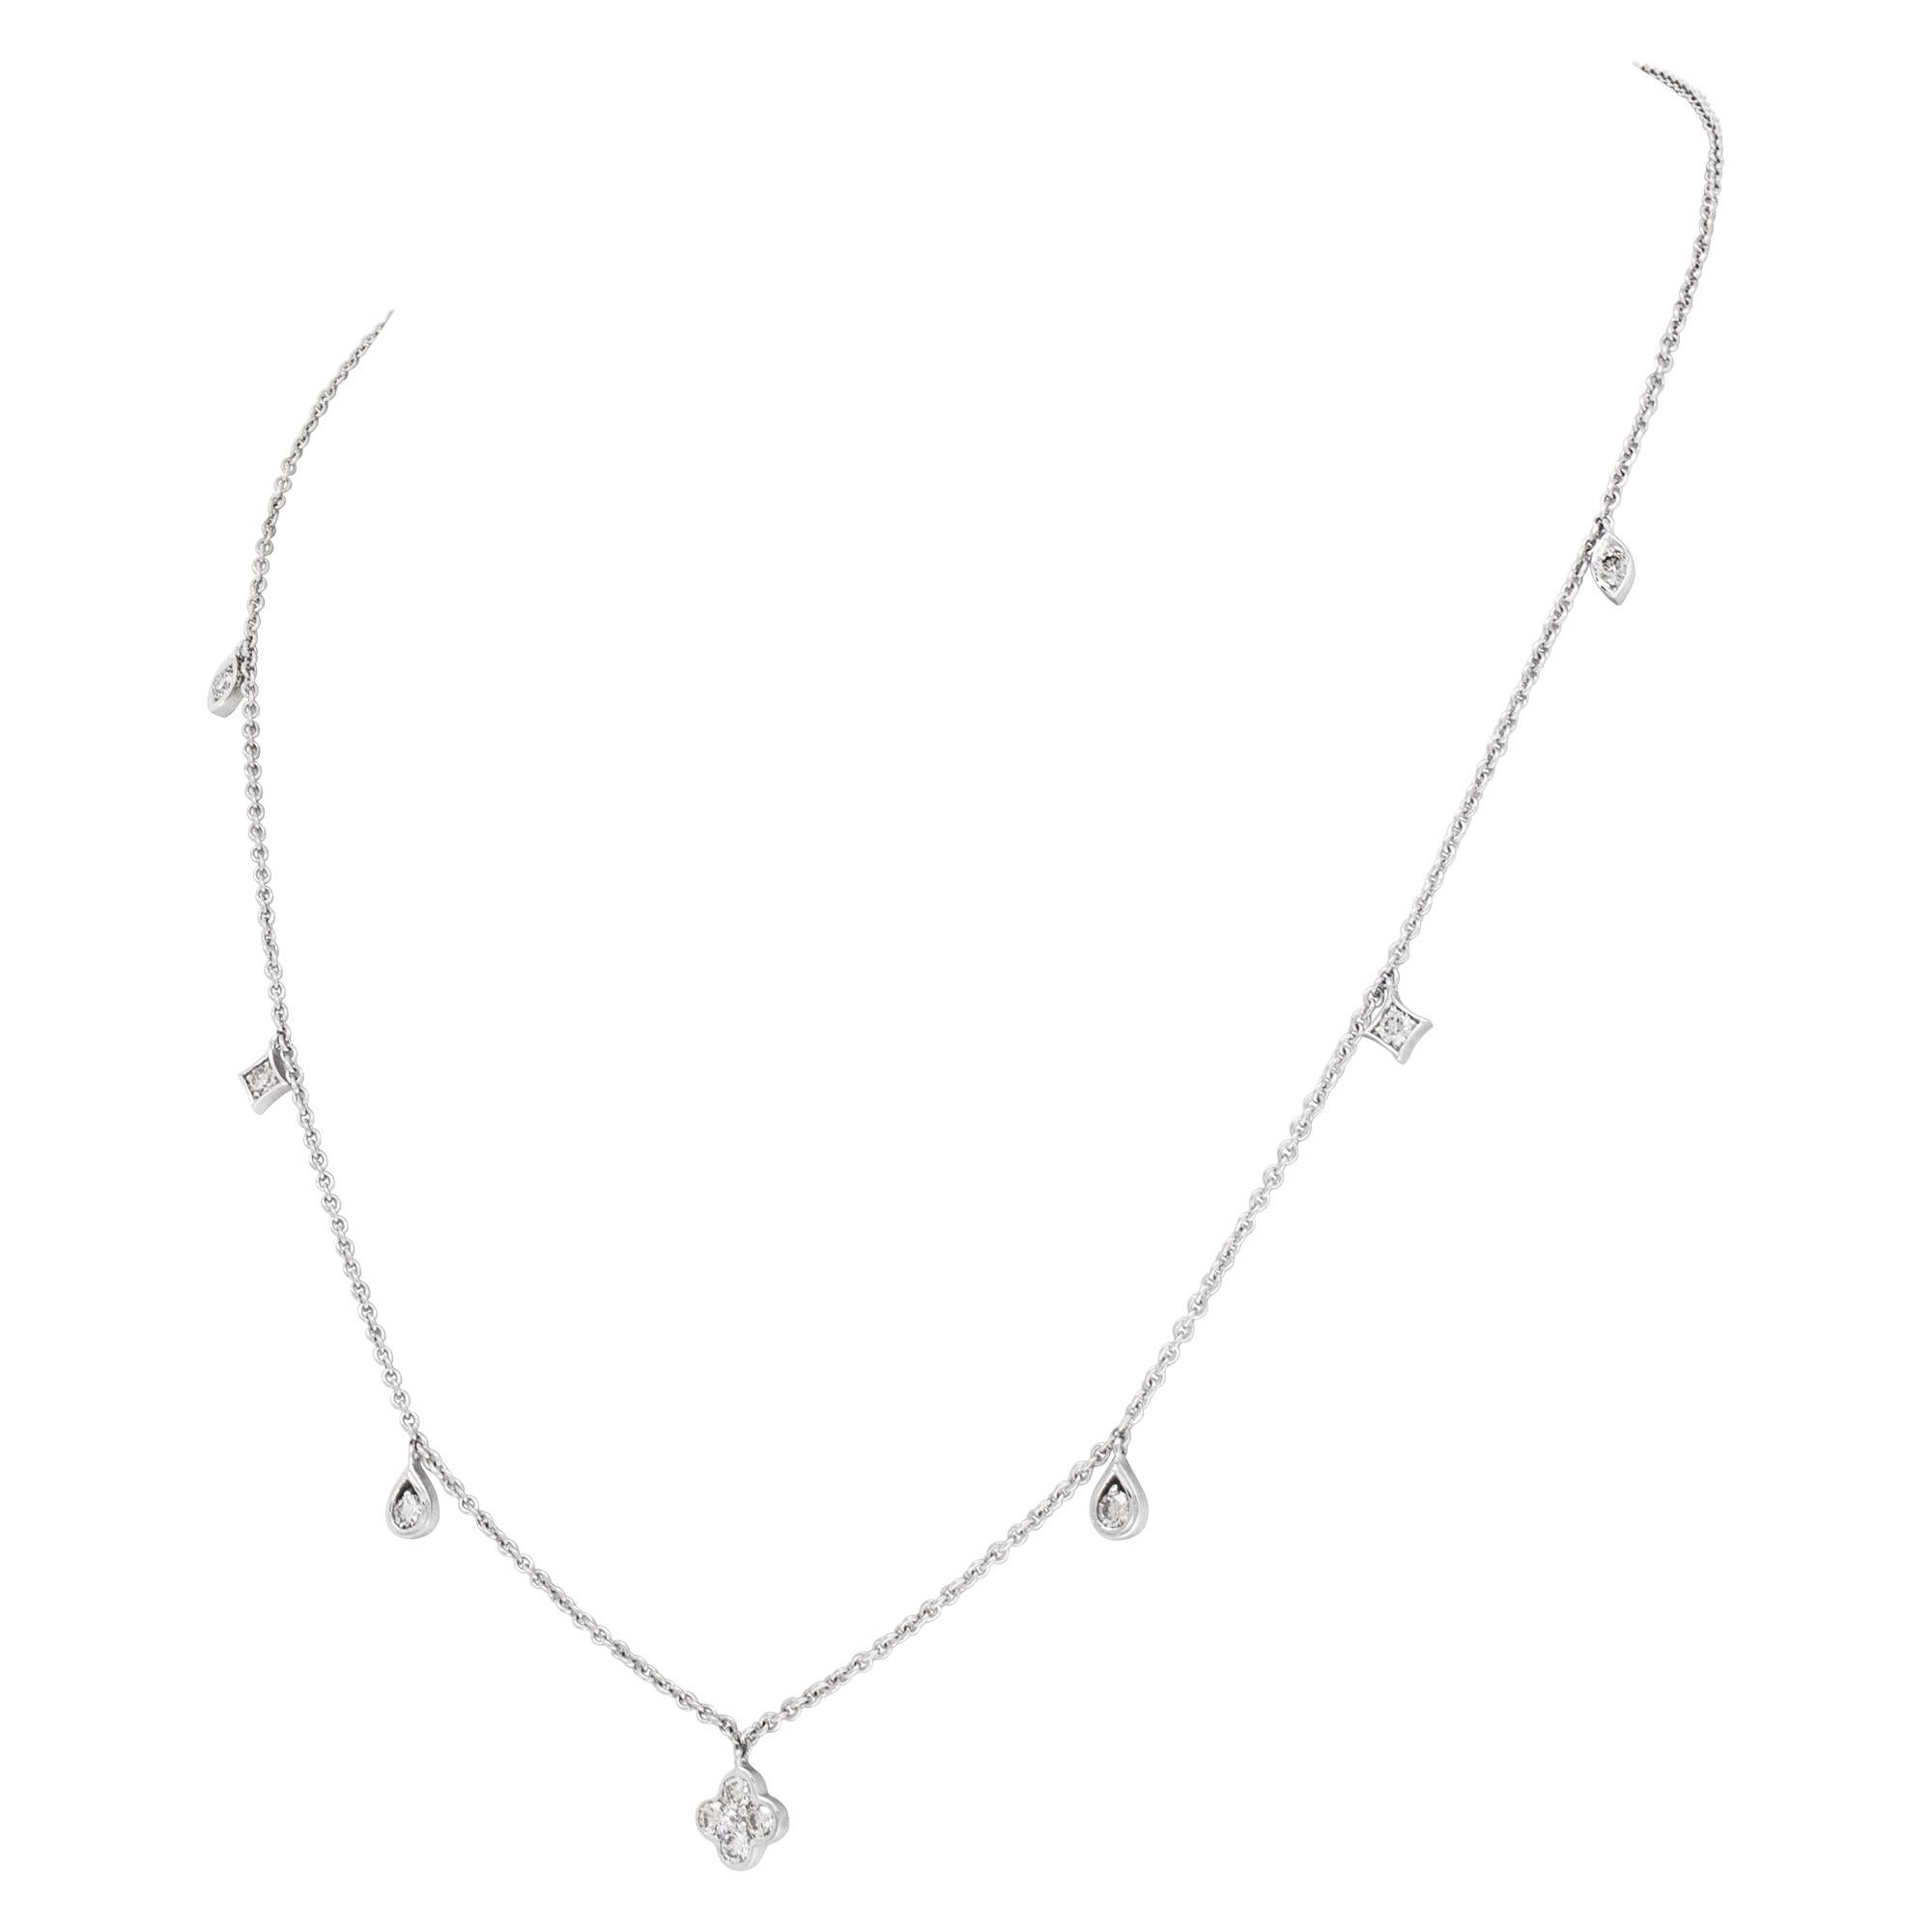 Chain Necklace in 18k White Gold 